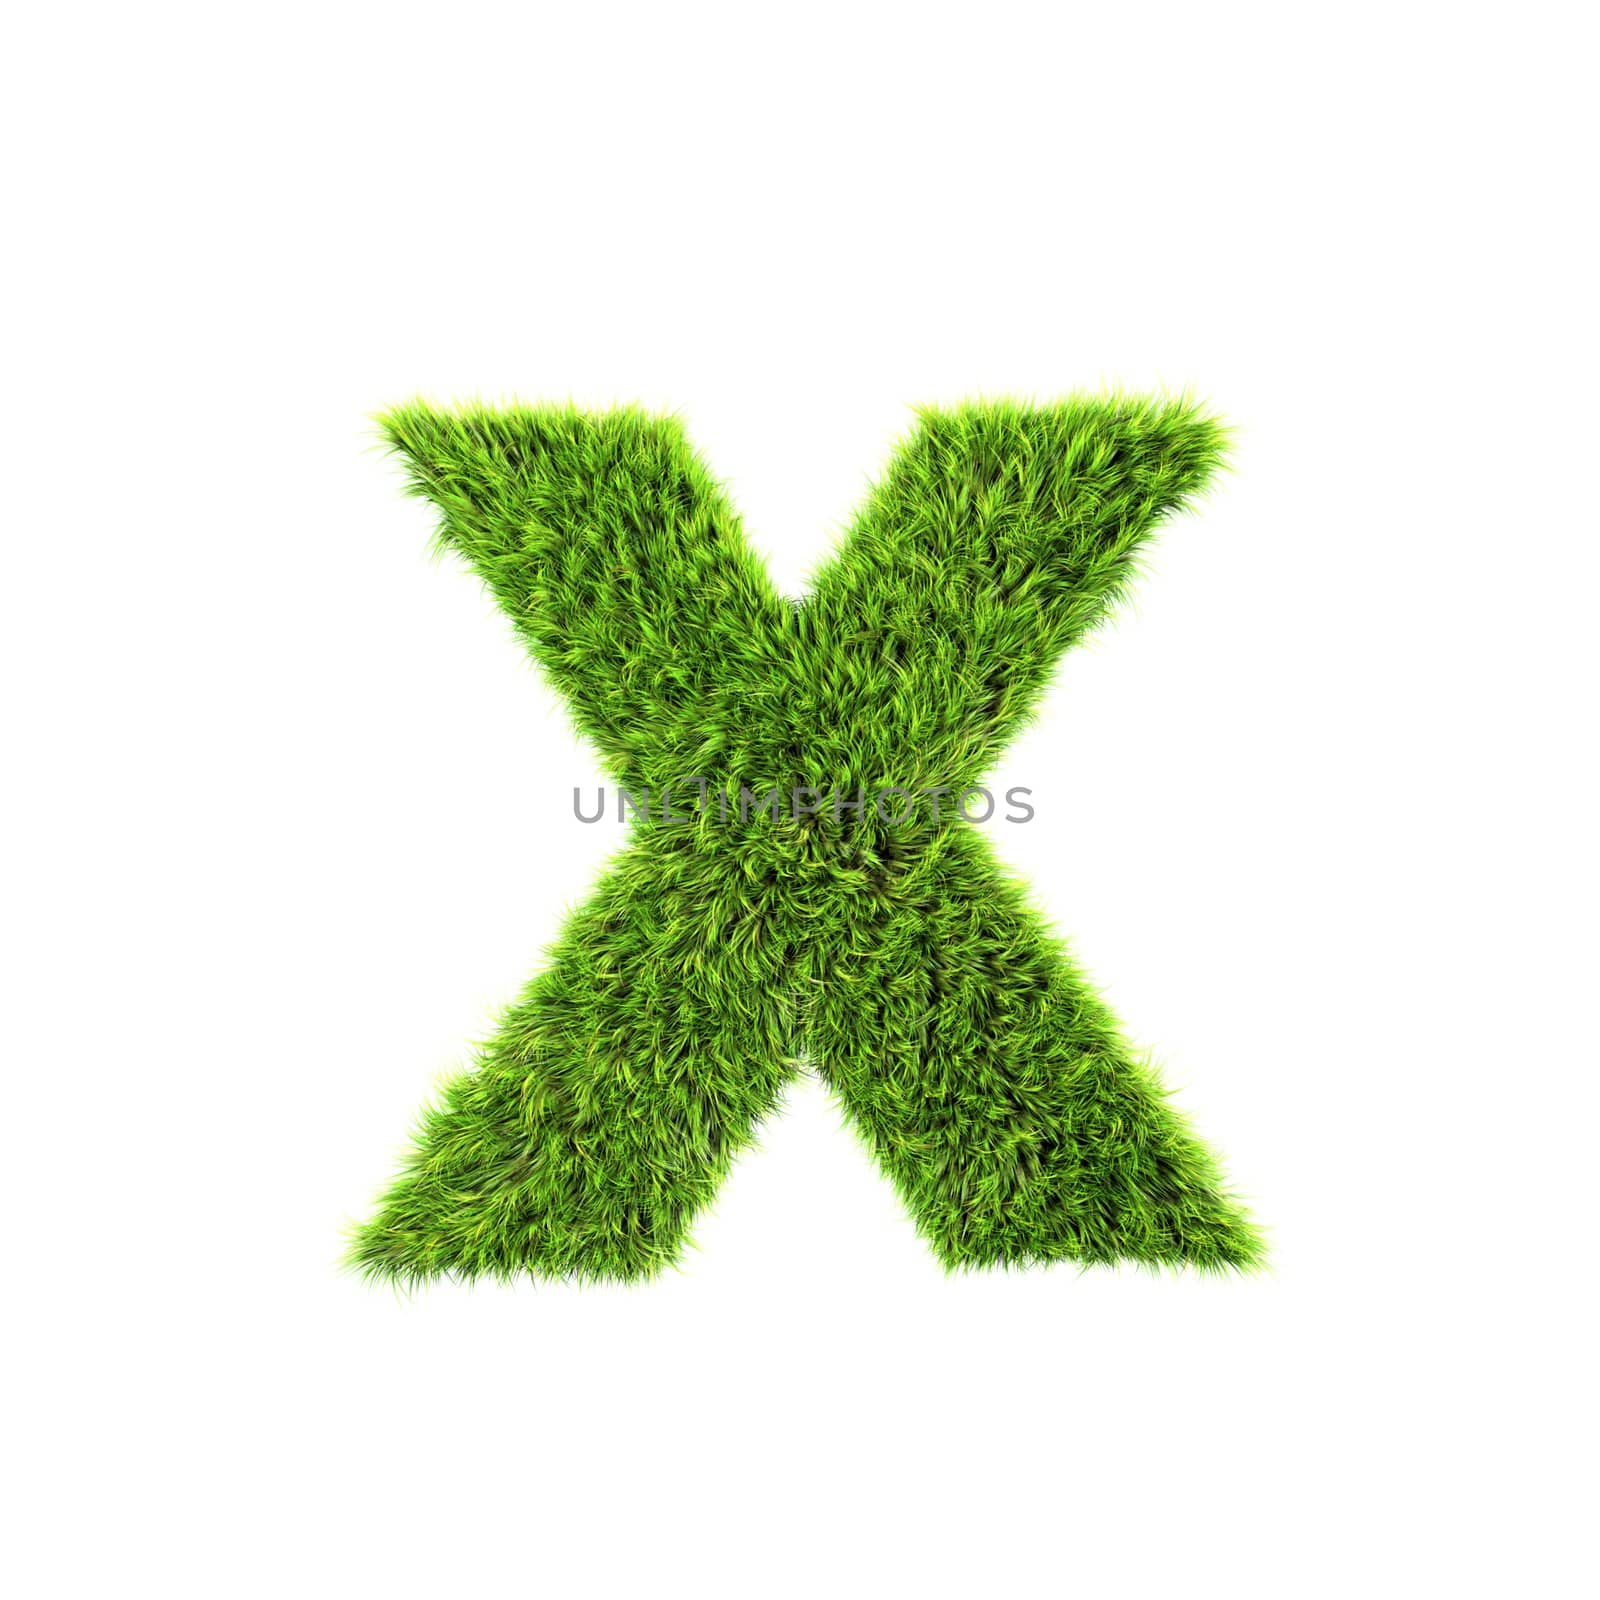 3d grass letter isolated on white background - x